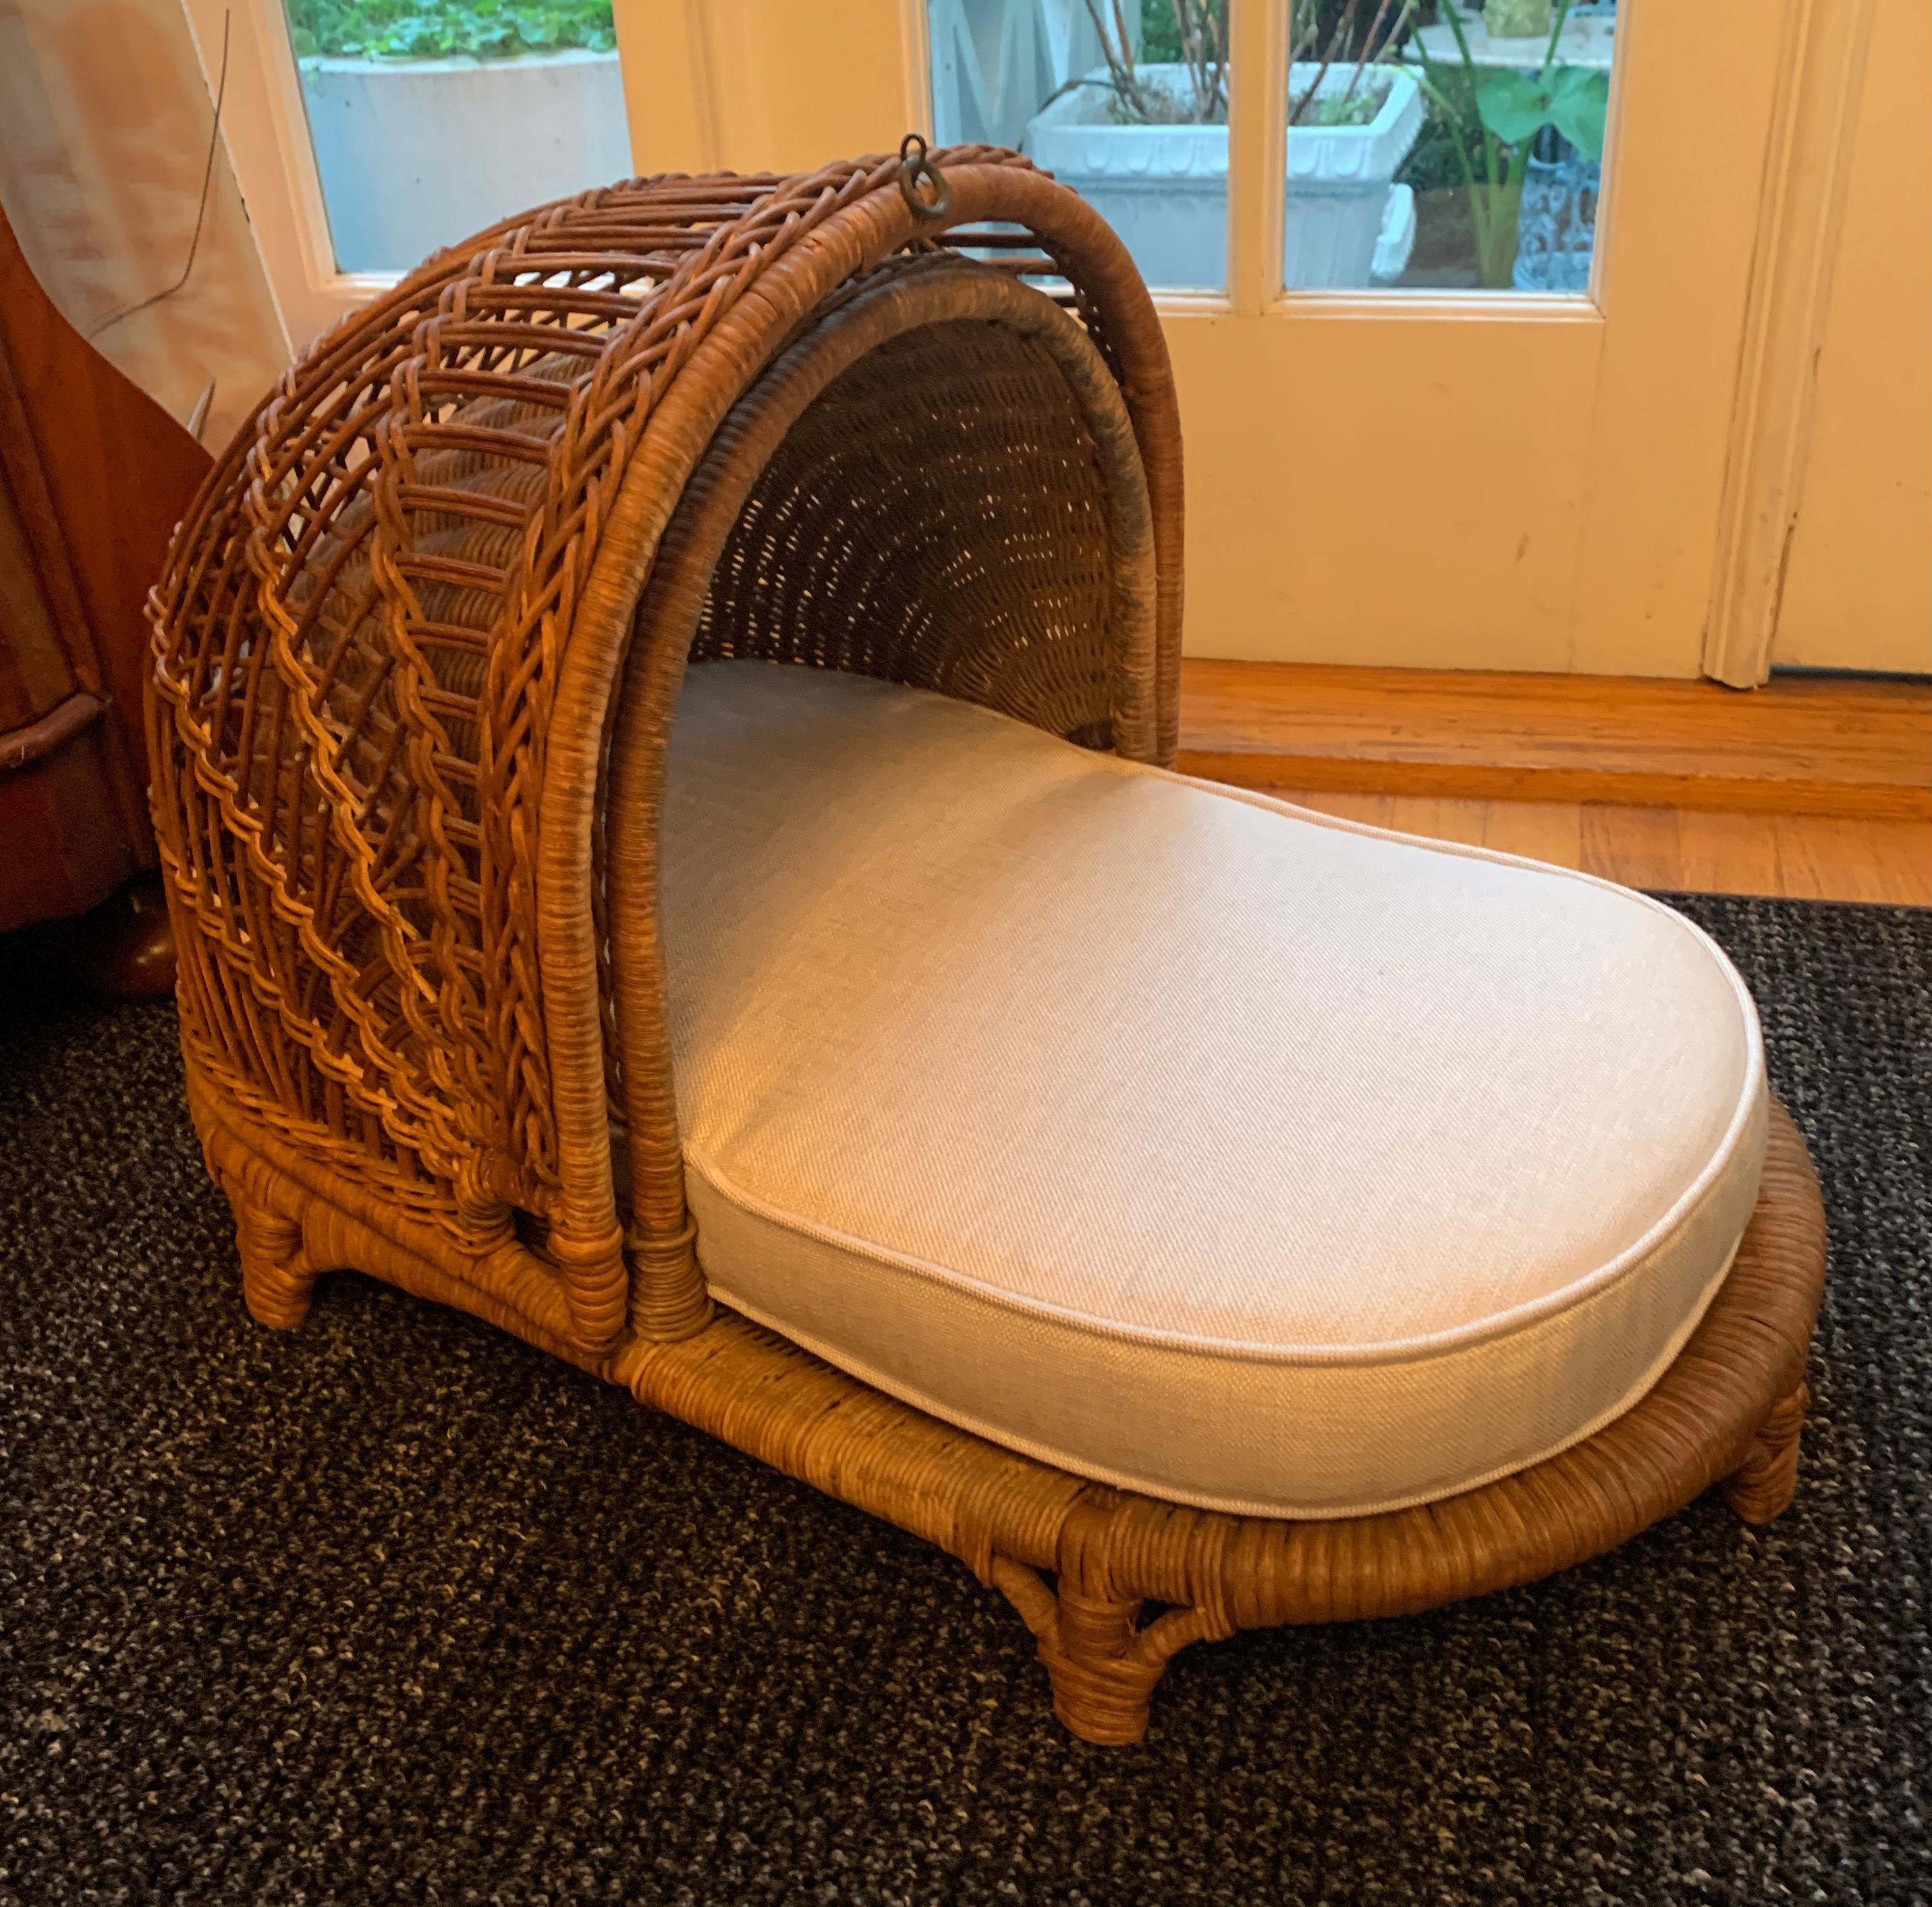 Woven wicker rattan dog bed with closing top and linen cushion - The vintage wicker piece has a custom linen pad. The top folds closed to move dog or store items. A very cleaver take on a vintage basket. Well suited for small dogs or